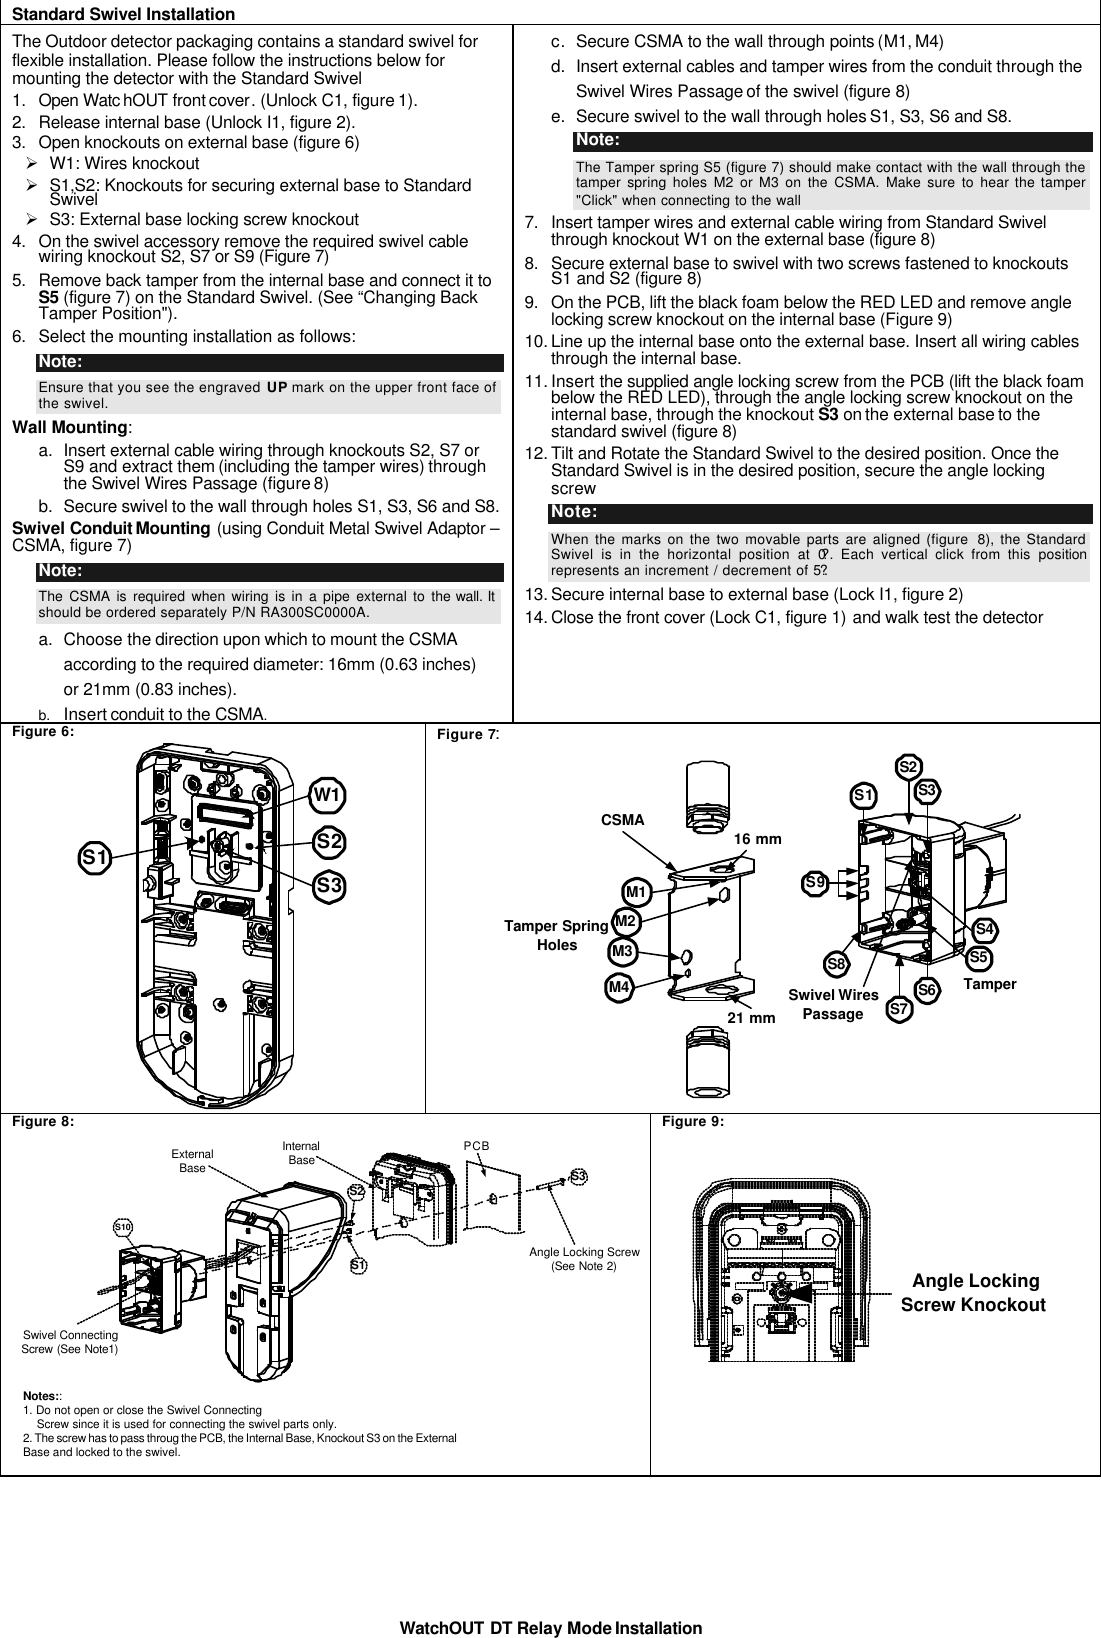 WatchOUT DT Relay Mode Installation  Standard Swivel Installation  The Outdoor detector packaging contains a standard swivel for flexible installation. Please follow the instructions below for mounting the detector with the Standard Swivel 1. Open Watc hOUT front cover. (Unlock C1, figure 1). 2. Release internal base (Unlock I1, figure 2). 3. Open knockouts on external base (figure 6)  Ø W1: Wires knockout Ø S1,S2: Knockouts for securing external base to Standard Swivel Ø S3: External base locking screw knockout 4. On the swivel accessory remove the required swivel cable wiring knockout S2, S7 or S9 (Figure 7) 5. Remove back tamper from the internal base and connect it to S5 (figure 7) on the Standard Swivel. (See “Changing Back Tamper Position&quot;). 6. Select the mounting installation as follows: Note:  Ensure that you see the engraved UP mark on the upper front face of the swivel. Wall Mounting: a. Insert external cable wiring through knockouts S2, S7 or S9 and extract them (including the tamper wires) through the Swivel Wires Passage (figure 8) b. Secure swivel to the wall through holes S1, S3, S6 and S8. Swivel Conduit Mounting (using Conduit Metal Swivel Adaptor – CSMA, figure 7) Note:   The CSMA is required when wiring is in a pipe external to the wall. It should be ordered separately P/N RA300SC0000A.  a. Choose the direction upon which to mount the CSMA according to the required diameter: 16mm (0.63 inches) or 21mm (0.83 inches). b. Insert conduit to the CSMA. c. Secure CSMA to the wall through points (M1, M4) d. Insert external cables and tamper wires from the conduit through the Swivel Wires Passage of the swivel (figure 8) e. Secure swivel to the wall through holes S1, S3, S6 and S8. Note:  The Tamper spring S5 (figure 7) should make contact with the wall through the tamper spring holes M2 or M3 on the CSMA. Make sure to hear the tamper &quot;Click&quot; when connecting to the wall 7. Insert tamper wires and external cable wiring from Standard Swivel through knockout W1 on the external base (figure 8) 8. Secure external base to swivel with two screws fastened to knockouts S1 and S2 (figure 8) 9. On the PCB, lift the black foam below the RED LED and remove angle locking screw knockout on the internal base (Figure 9) 10. Line up the internal base onto the external base. Insert all wiring cables through the internal base. 11. Insert the supplied angle locking screw from the PCB (lift the black foam below the RED LED), through the angle locking screw knockout on the internal base, through the knockout S3 on the external base to the standard swivel (figure 8) 12. Tilt and Rotate the Standard Swivel to the desired position. Once the Standard Swivel is in the desired position, secure the angle locking screw Note: When the marks on the two movable parts are aligned (figure  8), the Standard Swivel is in the horizontal position at 0?. Each vertical click from this position represents an increment / decrement of 5?.  13. Secure internal base to external base (Lock I1, figure 2)  14. Close the front cover (Lock C1, figure 1) and walk test the detector Figure 6: W1S1 S2S3 Figure 7:  21 mm16 mmTamper SpringHolesCSMAM1M2M3M4 TamperSwivel WiresPassageS1S2S3S4S5S6S7S8S9 Figure 8: S1S10ExternalBaseInternalBase PCBS3Notes::1. Do not open or close the Swivel Connecting    Screw since it is used for connecting the swivel parts only.2. The screw has to pass throug the PCB, the Internal Base, Knockout S3 on the External         Base and locked to the swivel.Swivel ConnectingScrew (See Note1)S2Angle Locking Screw(See Note 2)Figure 9:   Angle LockingScrew Knockout 